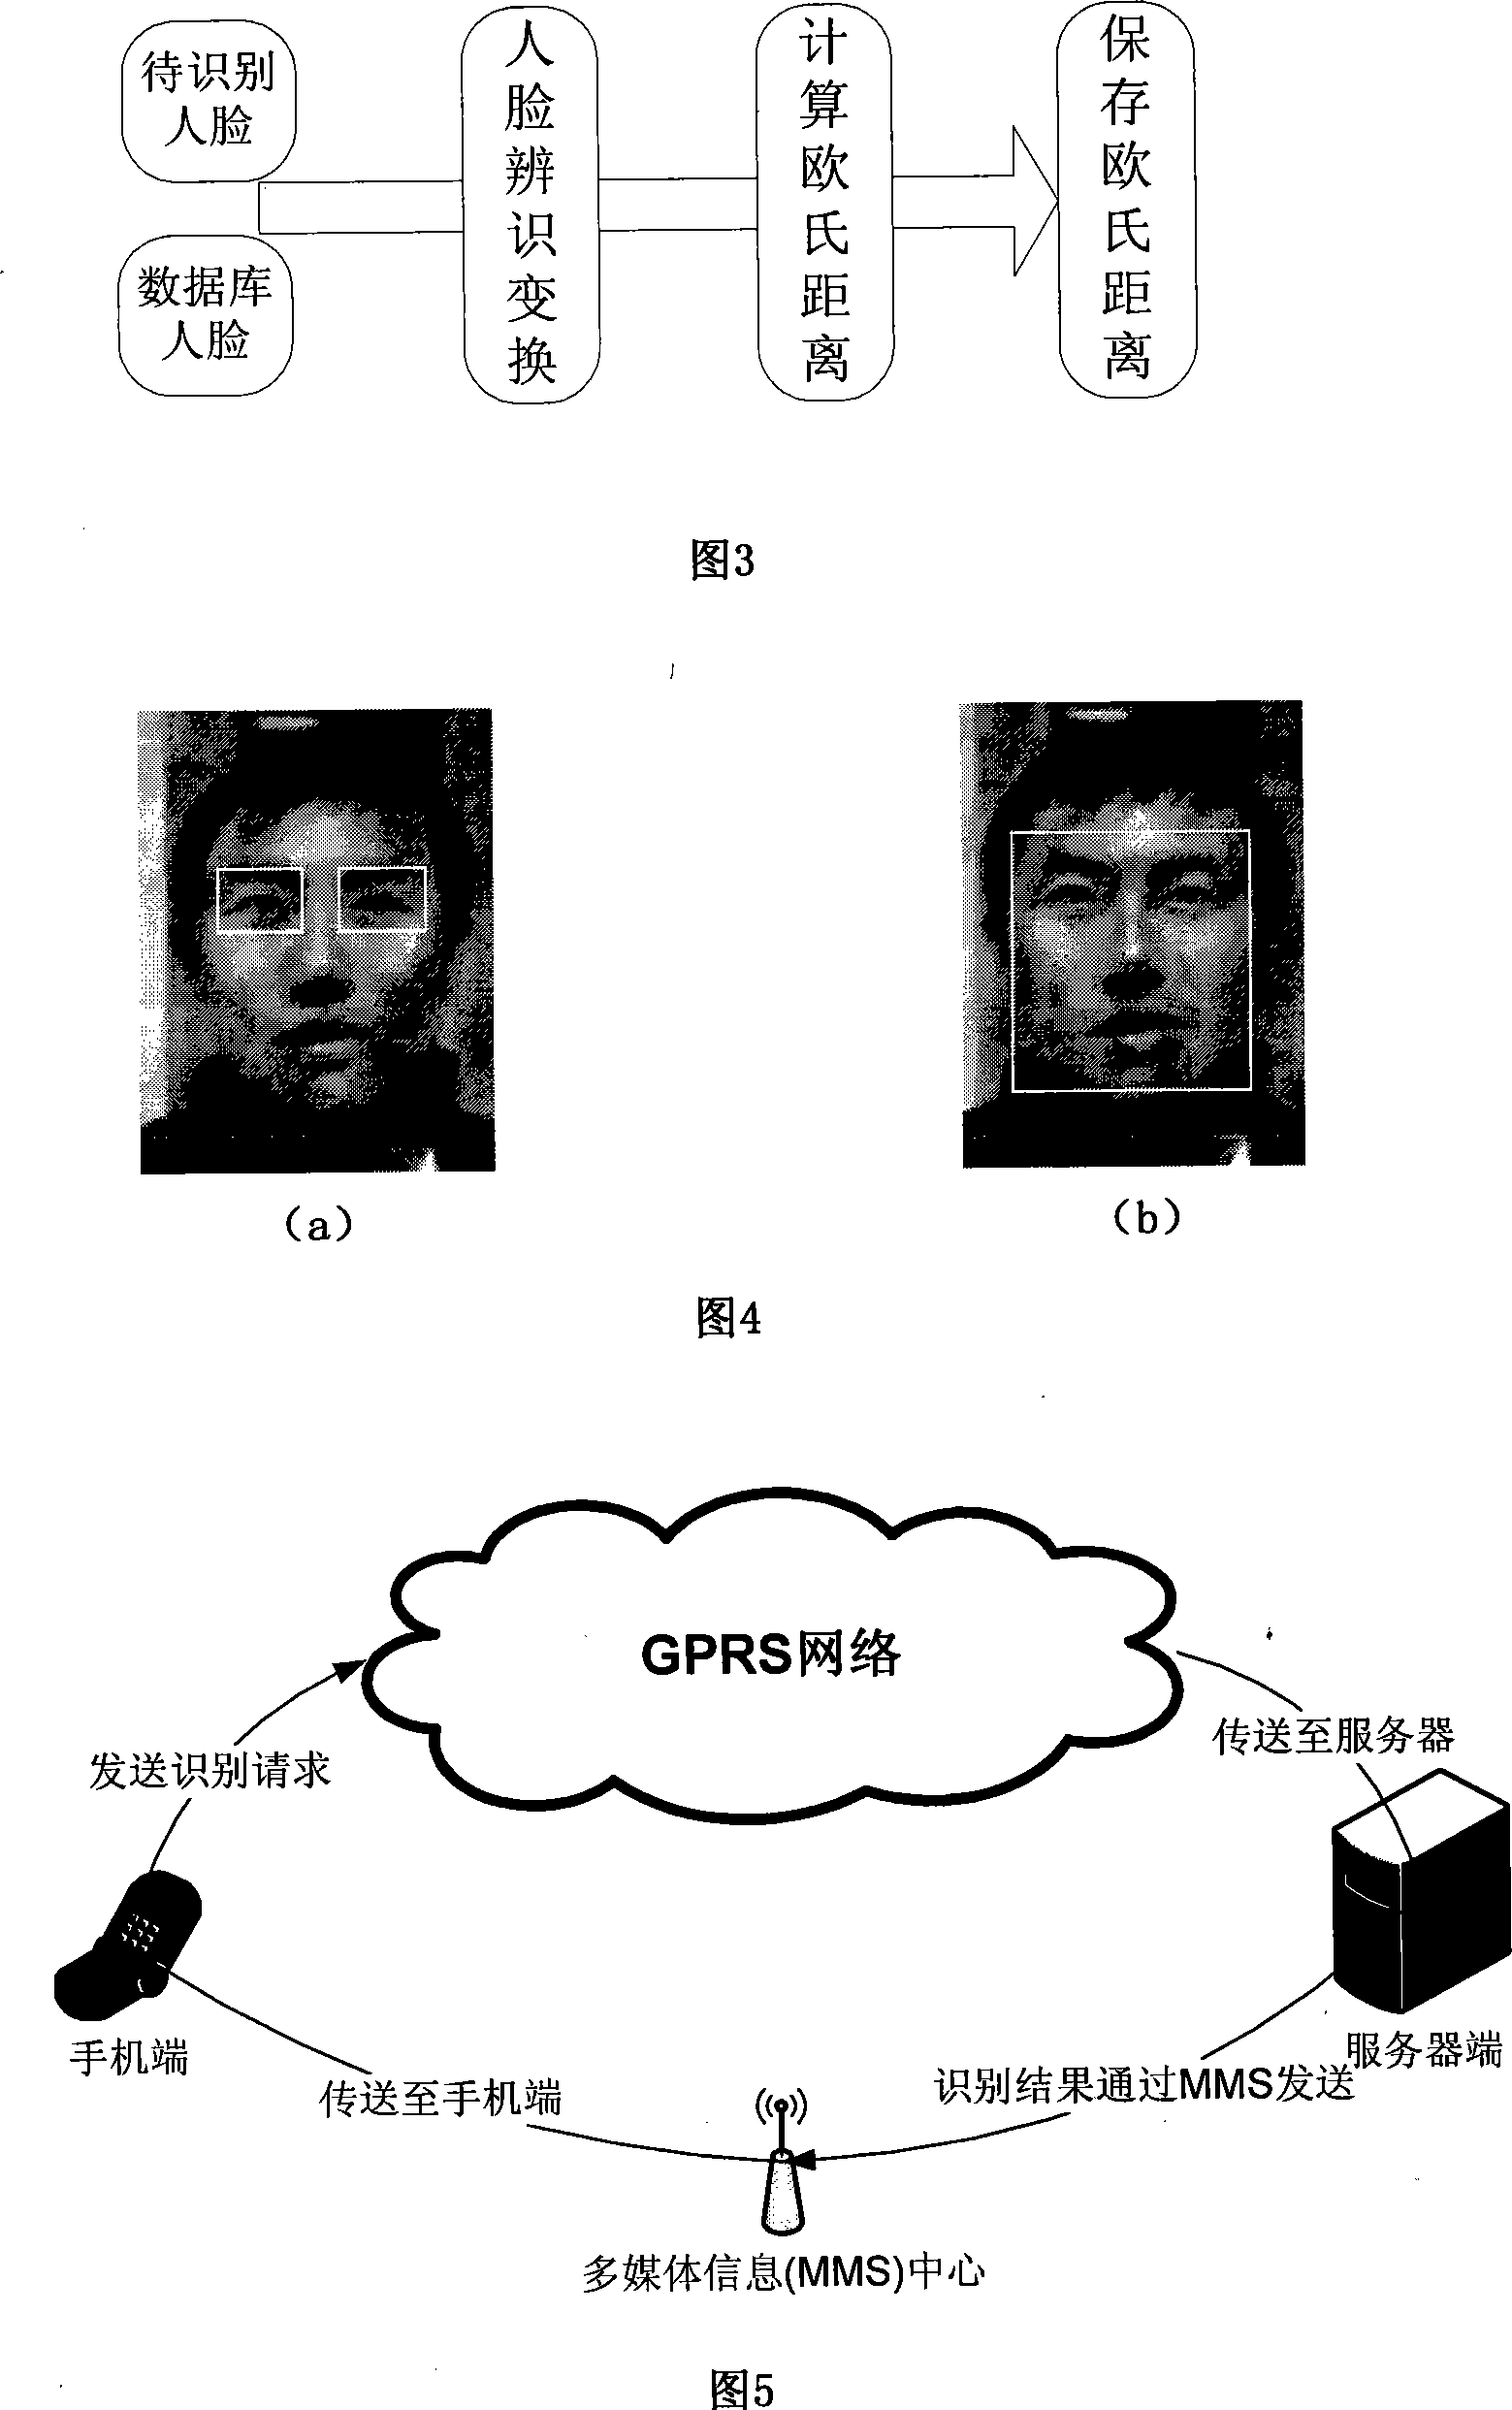 Personal identification method based on mobile phone pick-up head combining with human face recognition technique